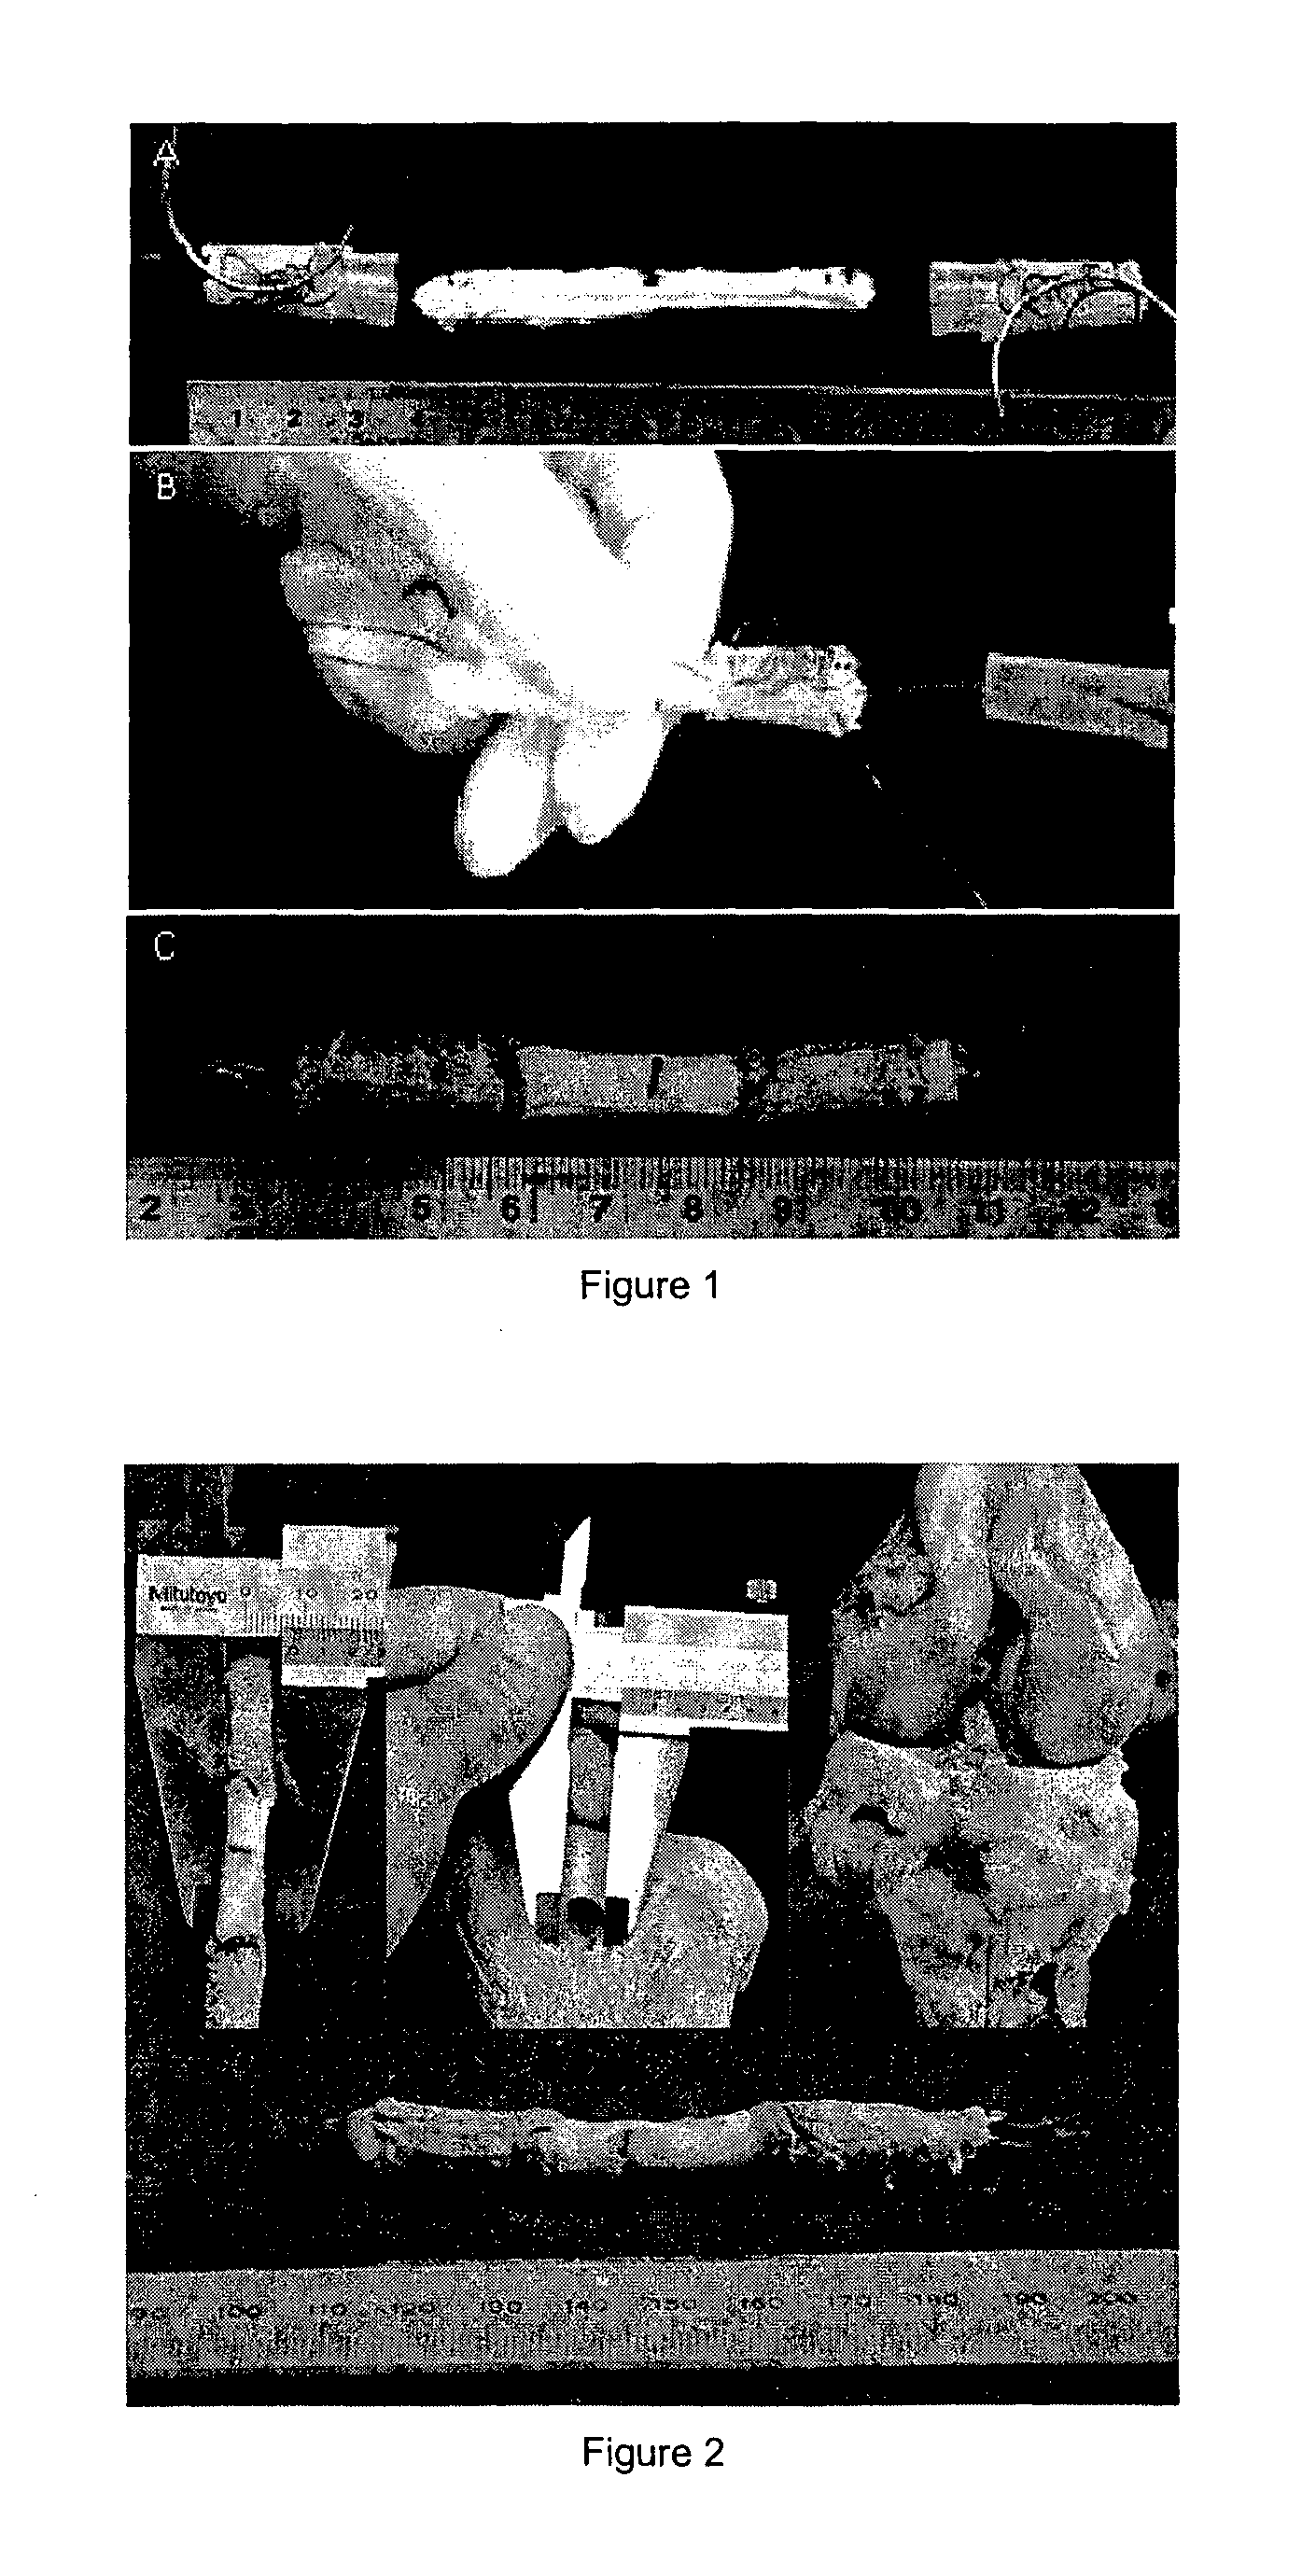 Tissue interface augmentation device for ligament/tendon reconstruction